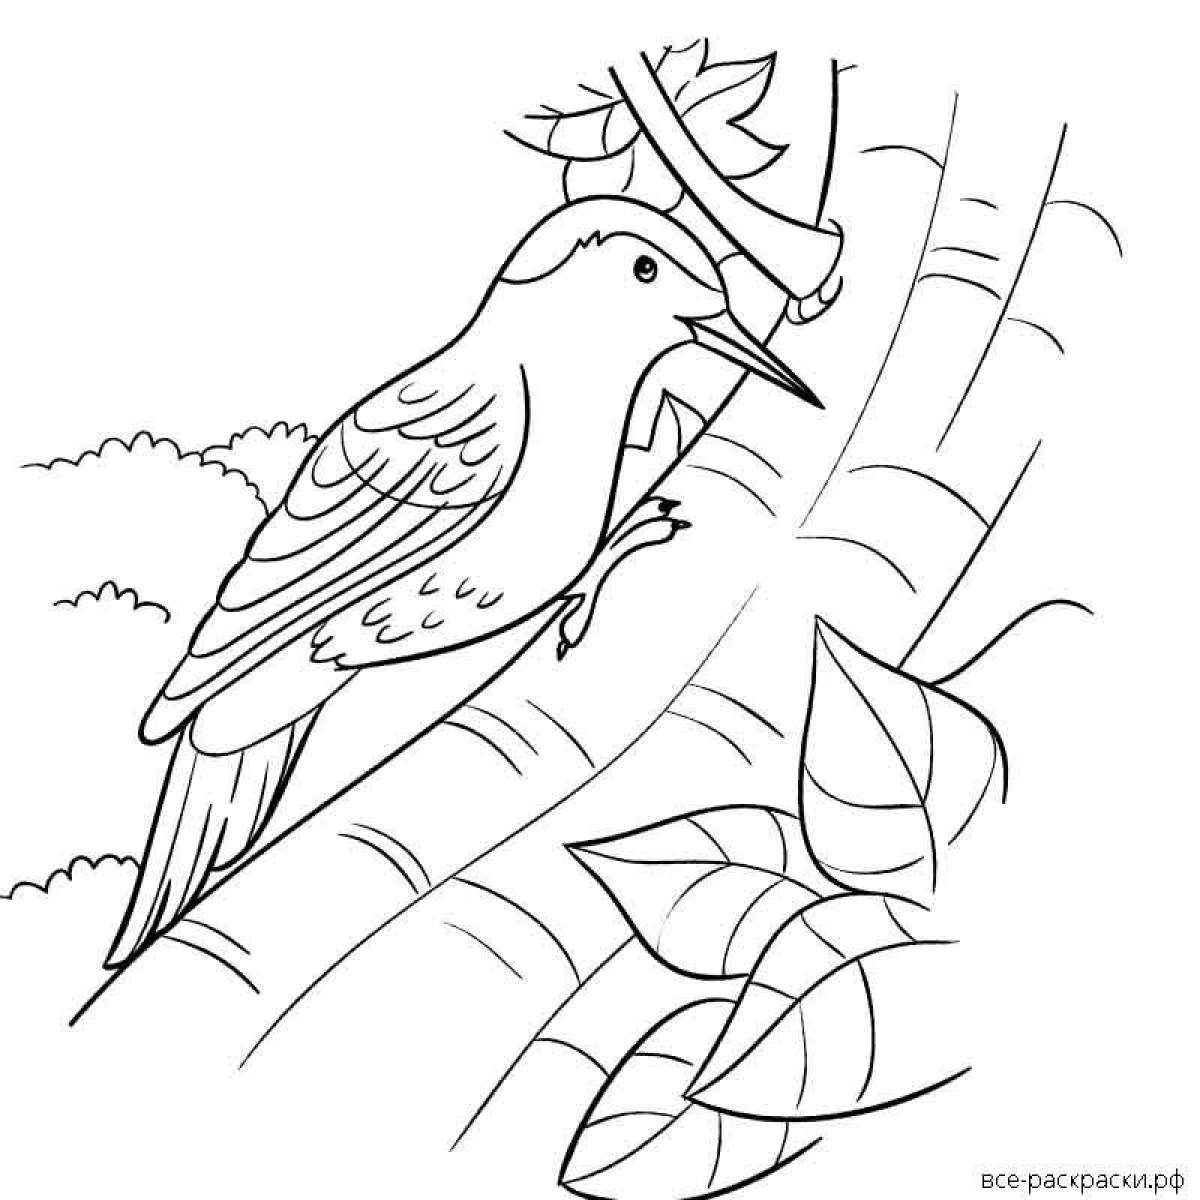 Attractive woodpecker coloring book for kids